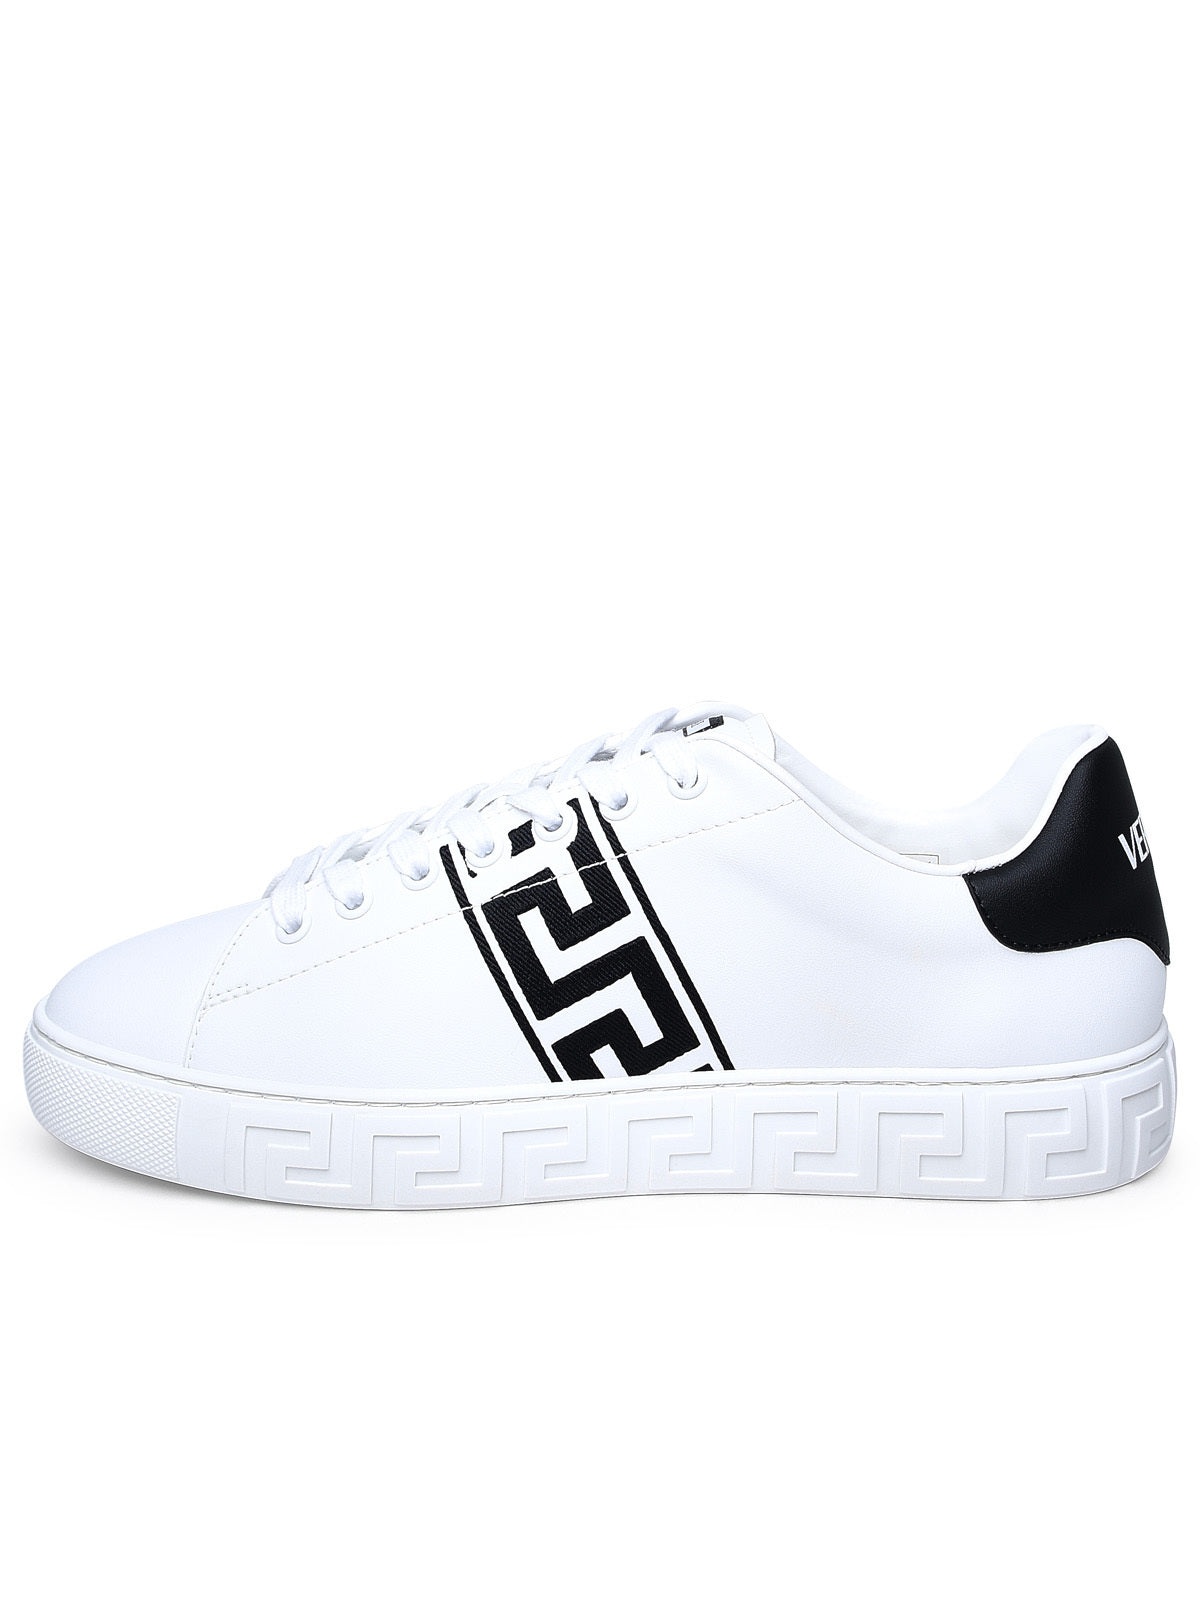 Versace Uomo White Leather Sneakers - 3